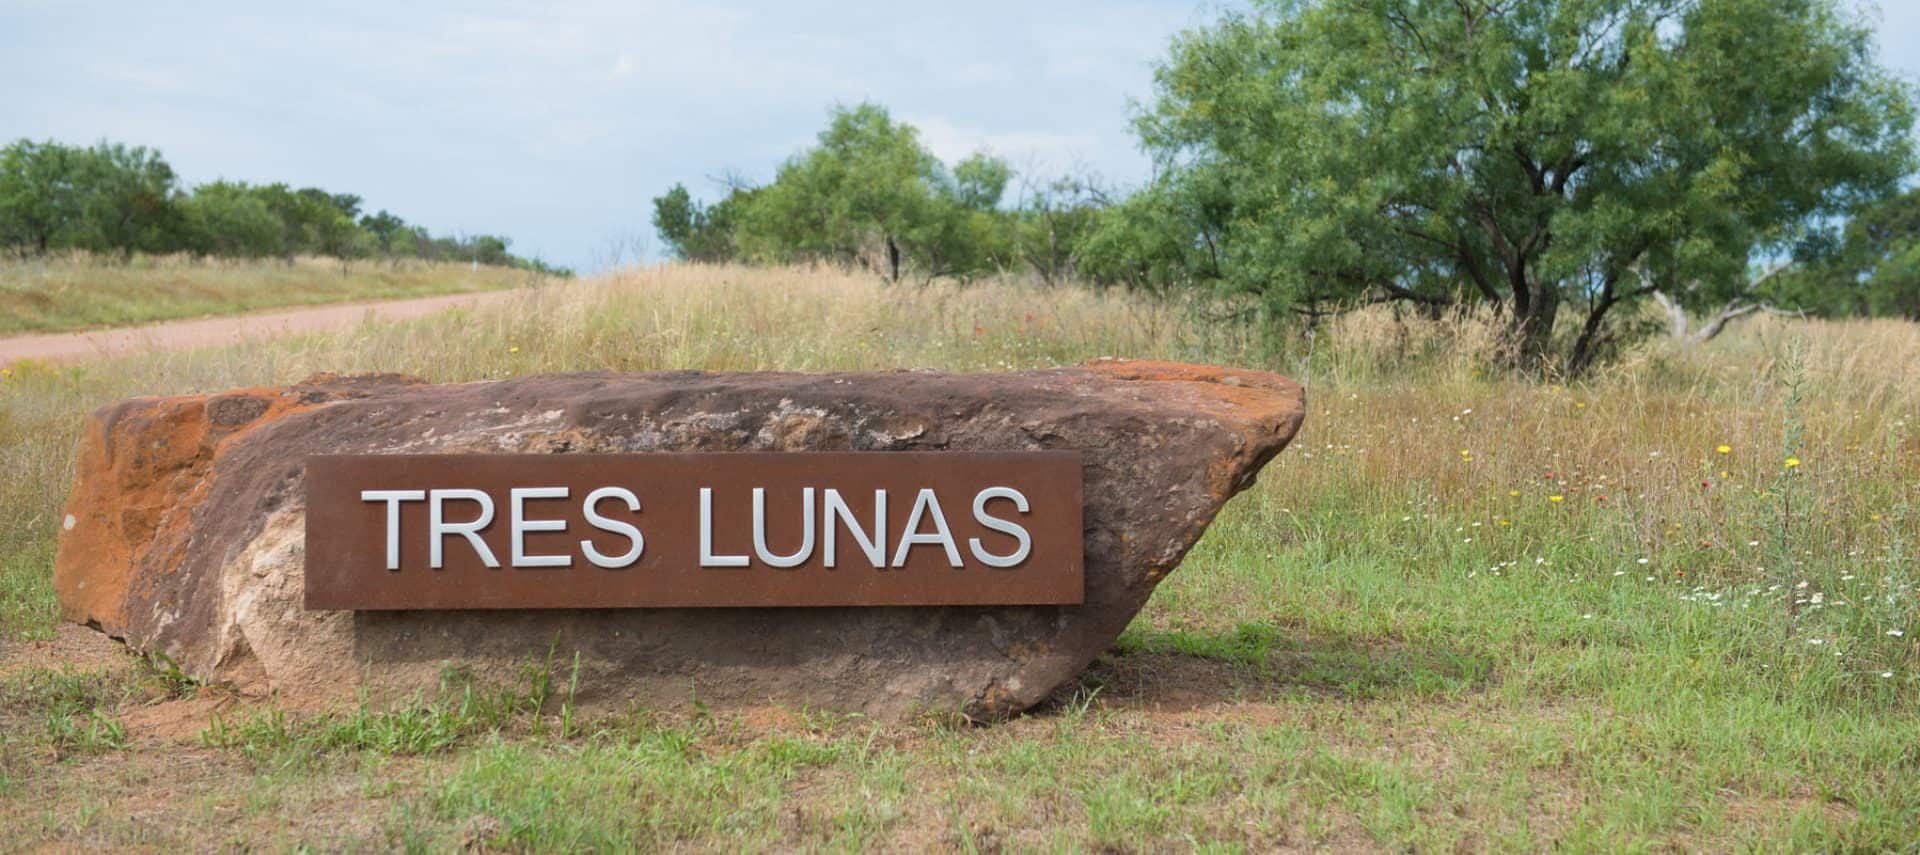 Large metal sign attached to large boulder that reads Tres Lunas surrounded by green grass and shrubs